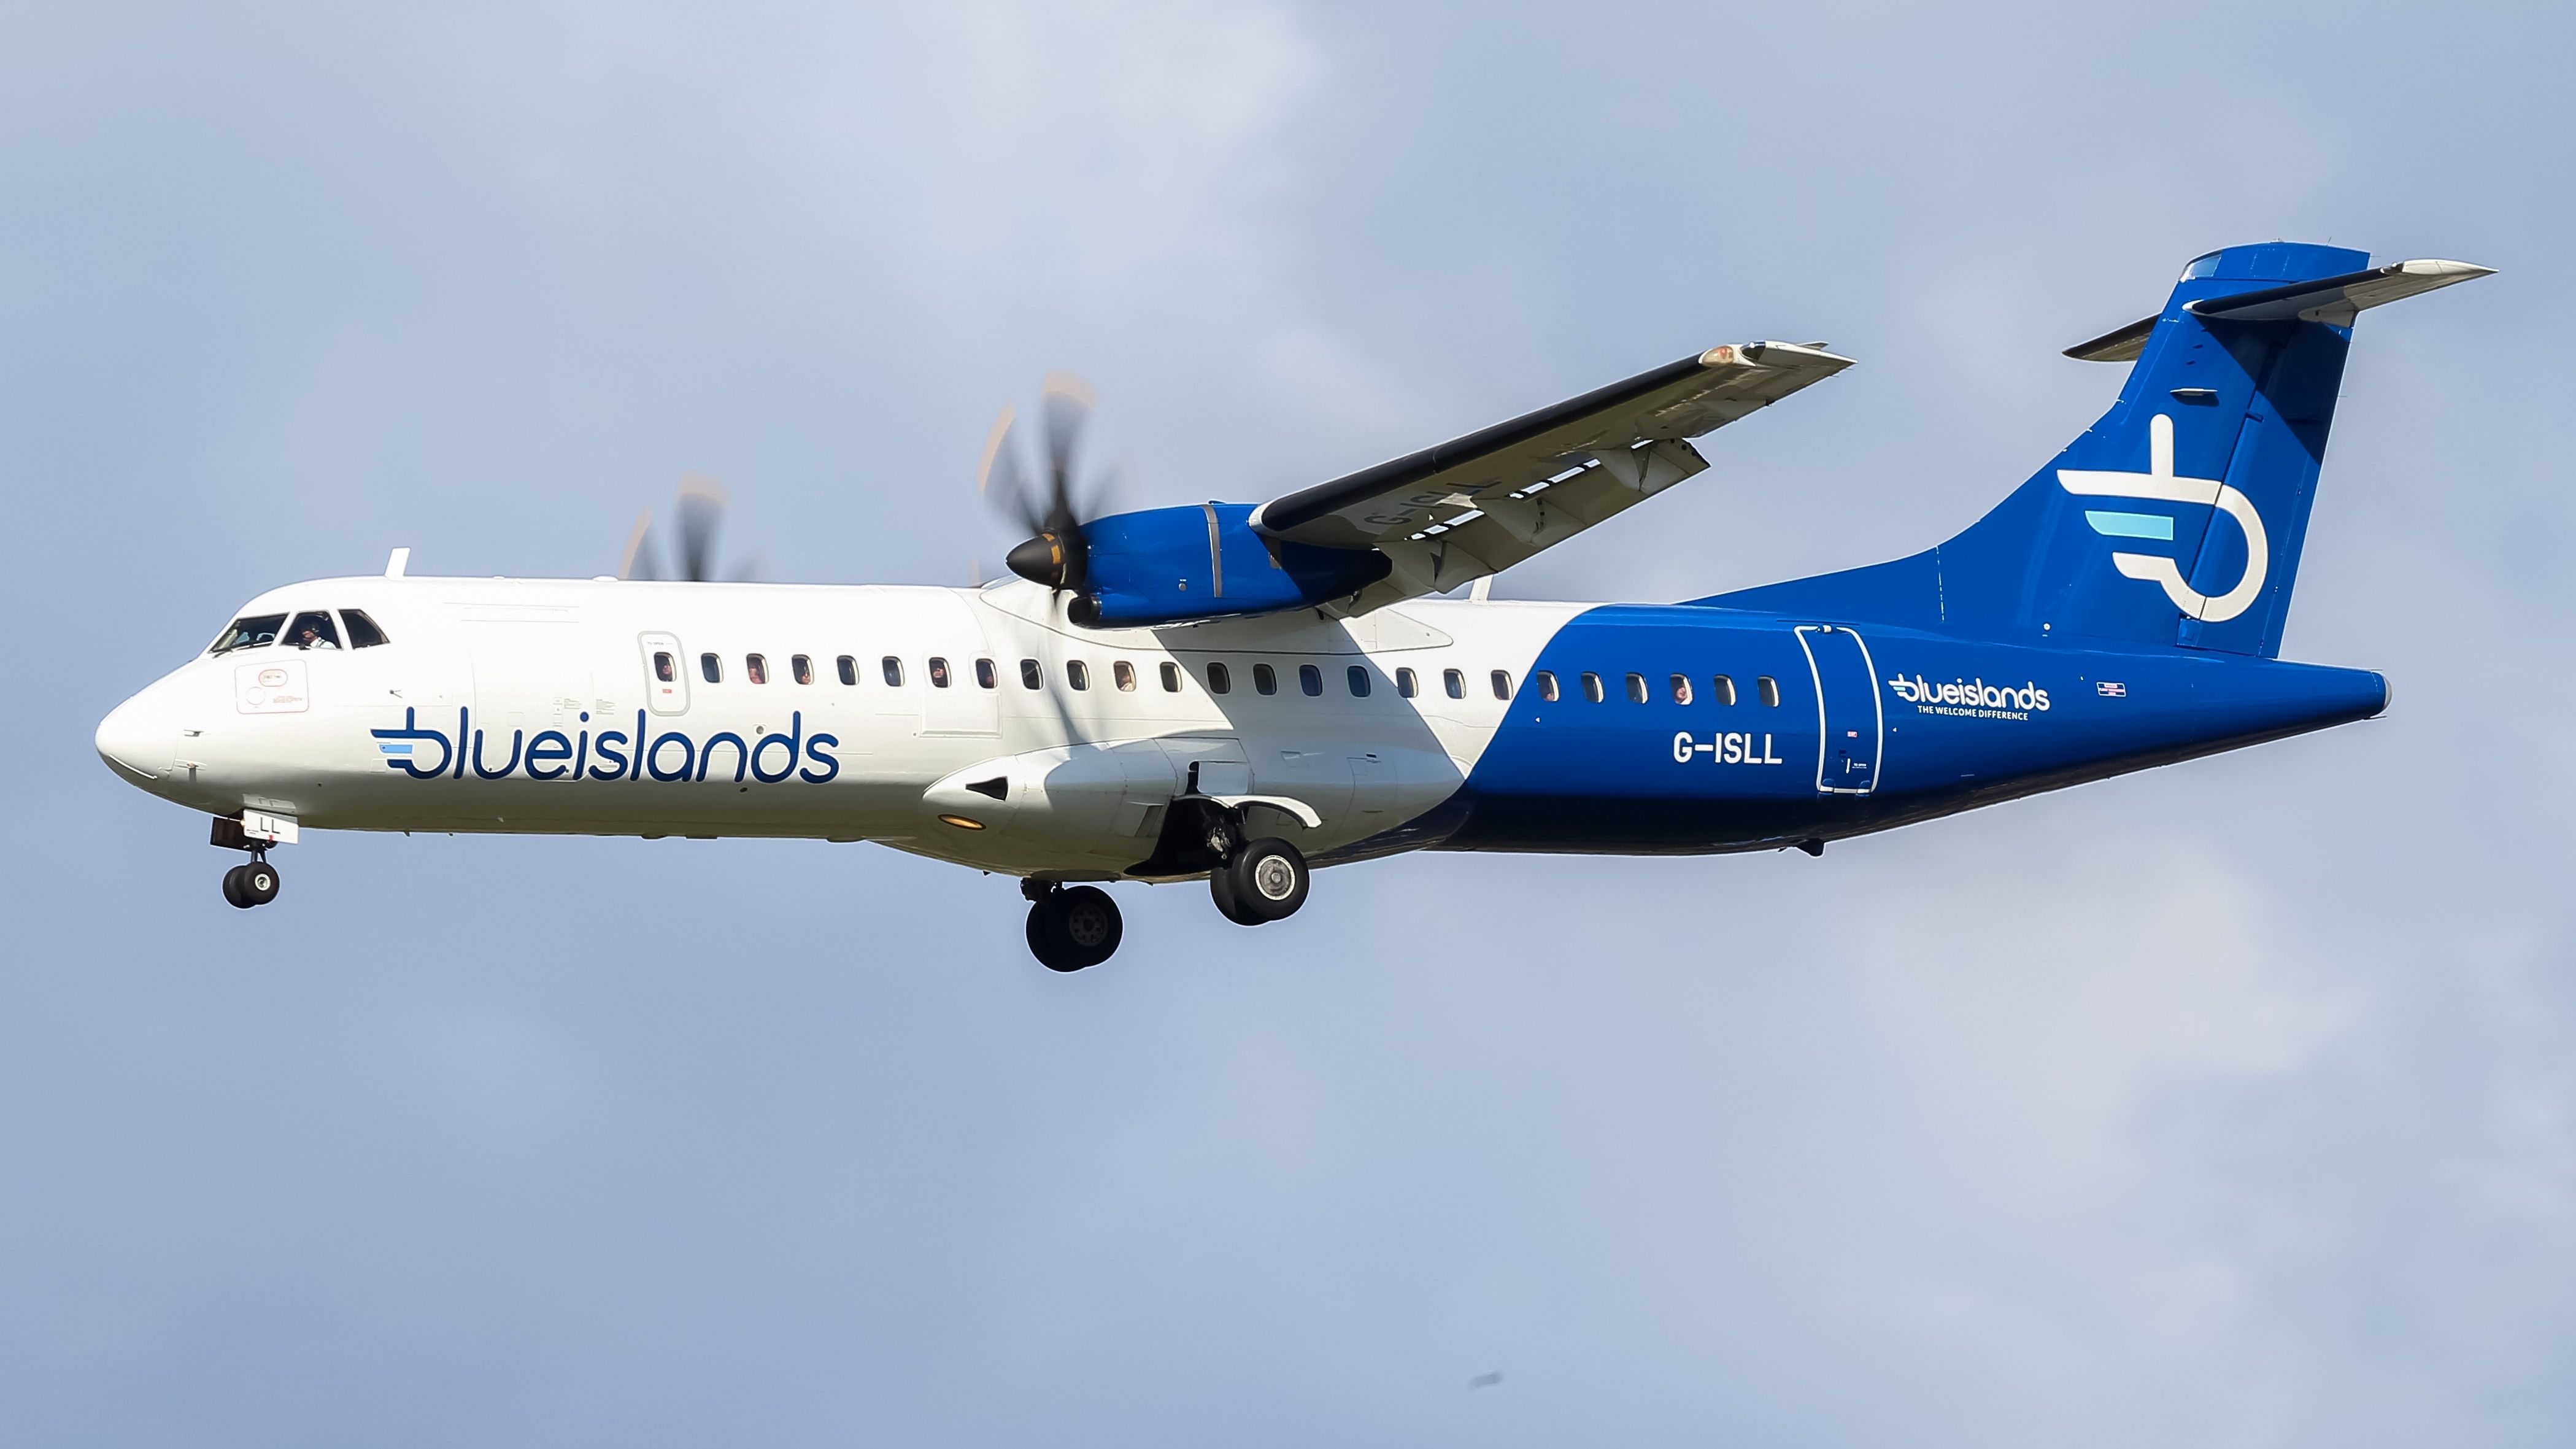 A Blue Islands ATR 72 flying low below the clouds.